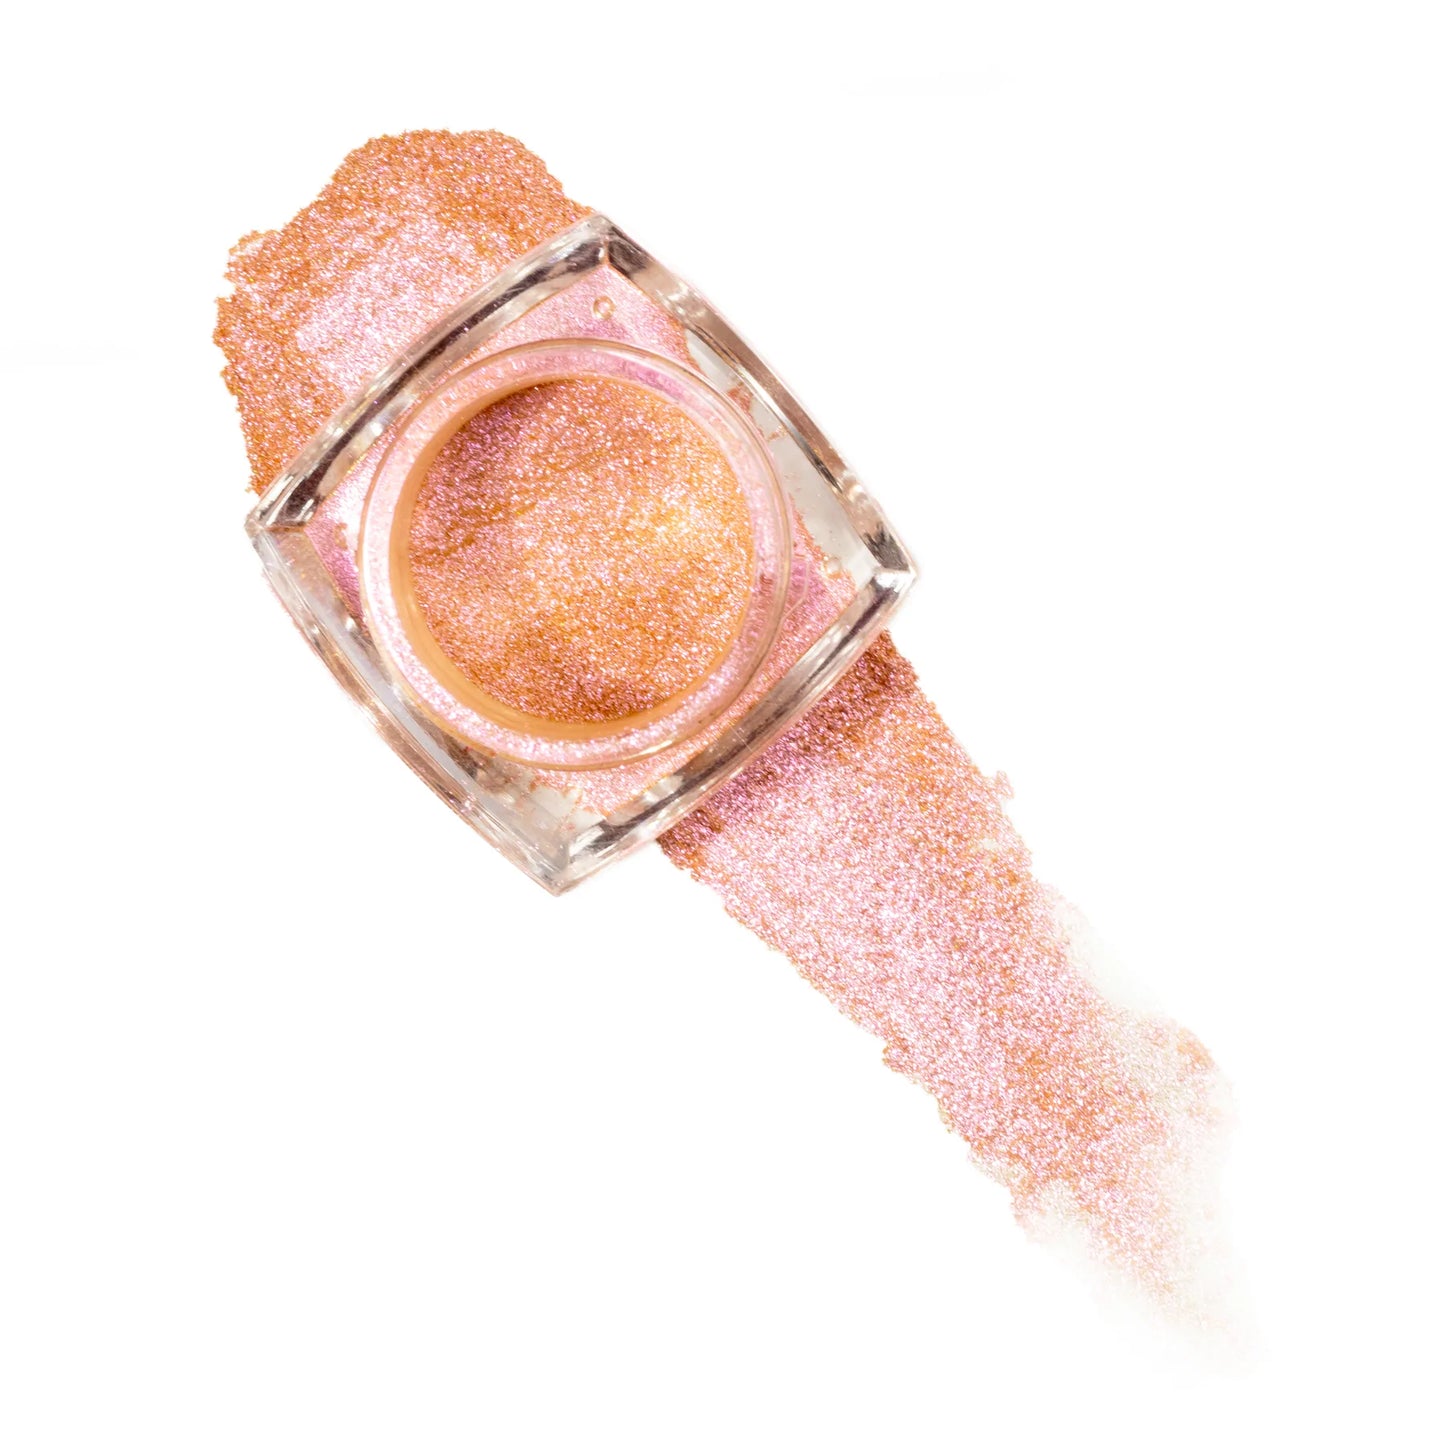 With Love Cosmetics Loose Pigment - Fairy Dust